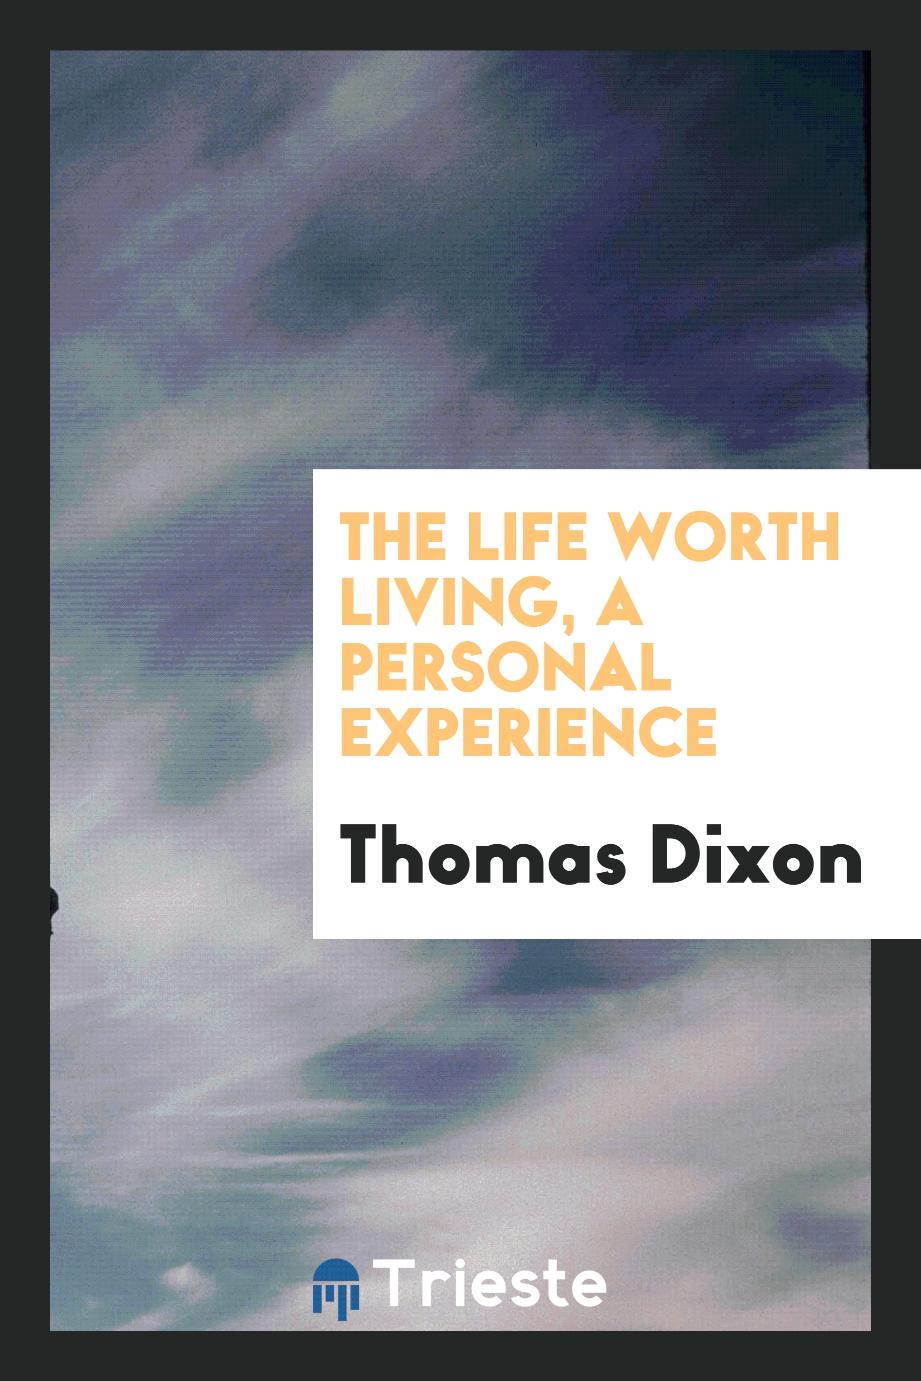 Thomas Dixon - The life worth living, a personal experience